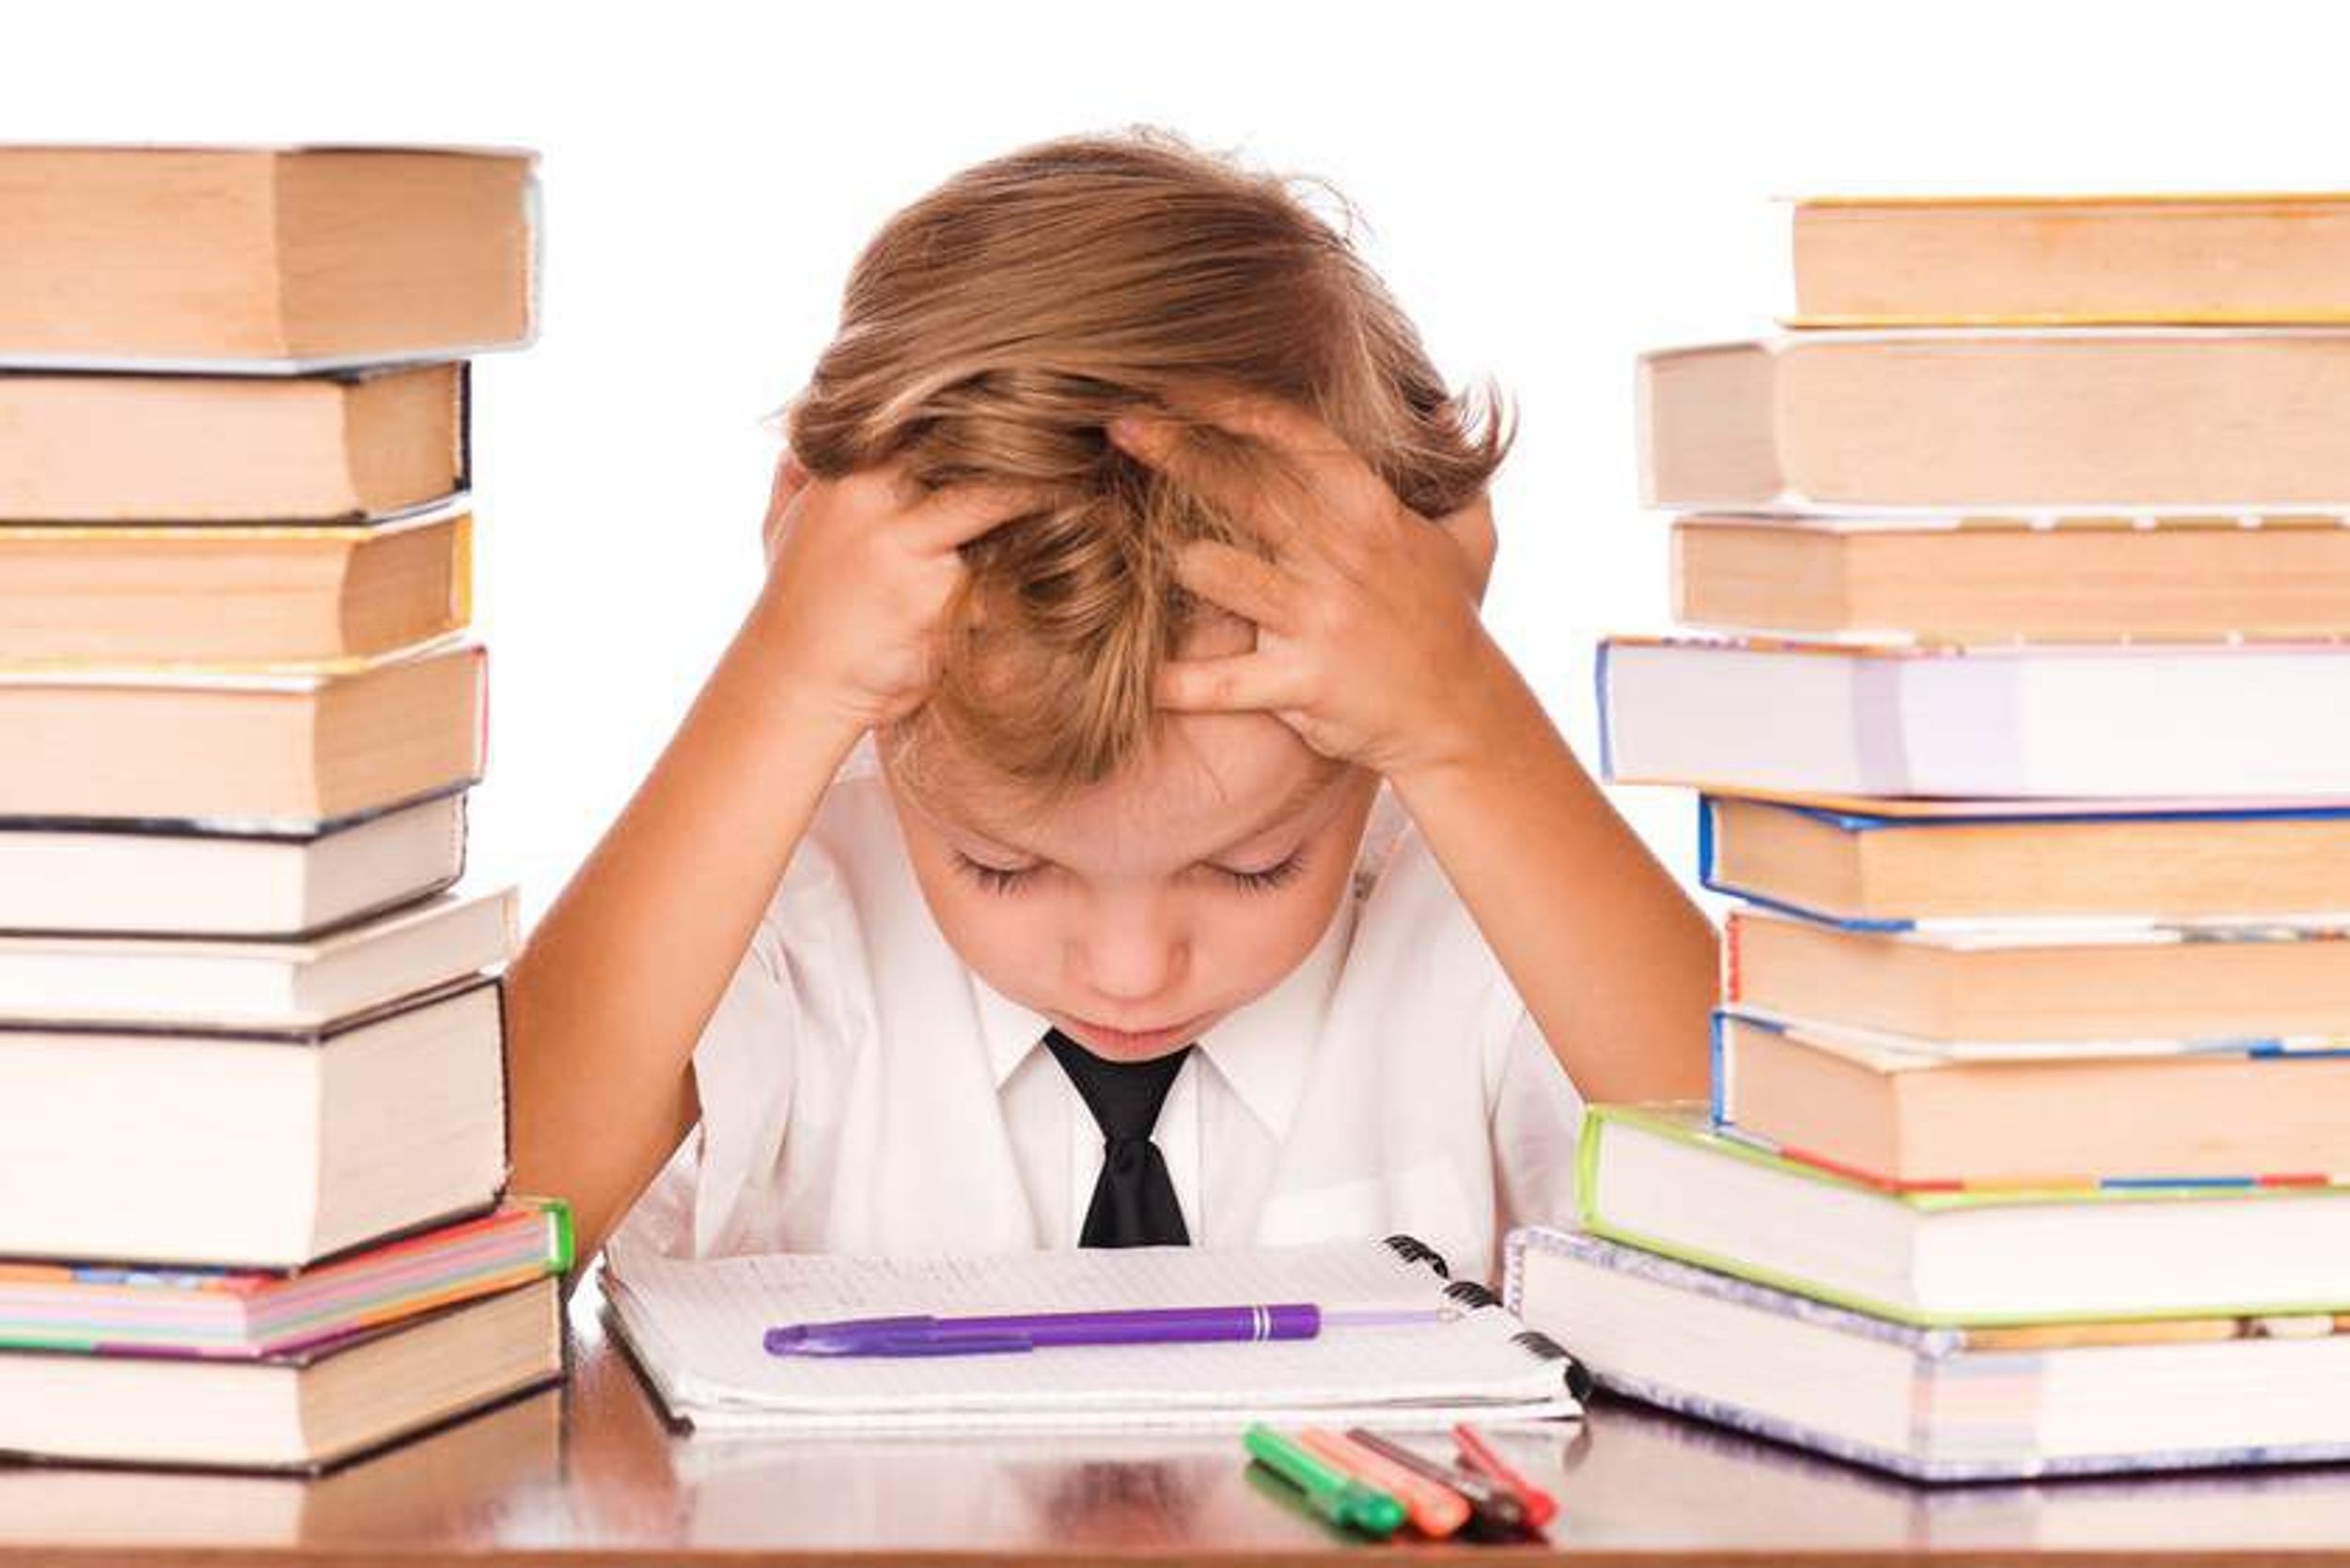 For Children, Stress Causes Failure And Failure Causes Stress